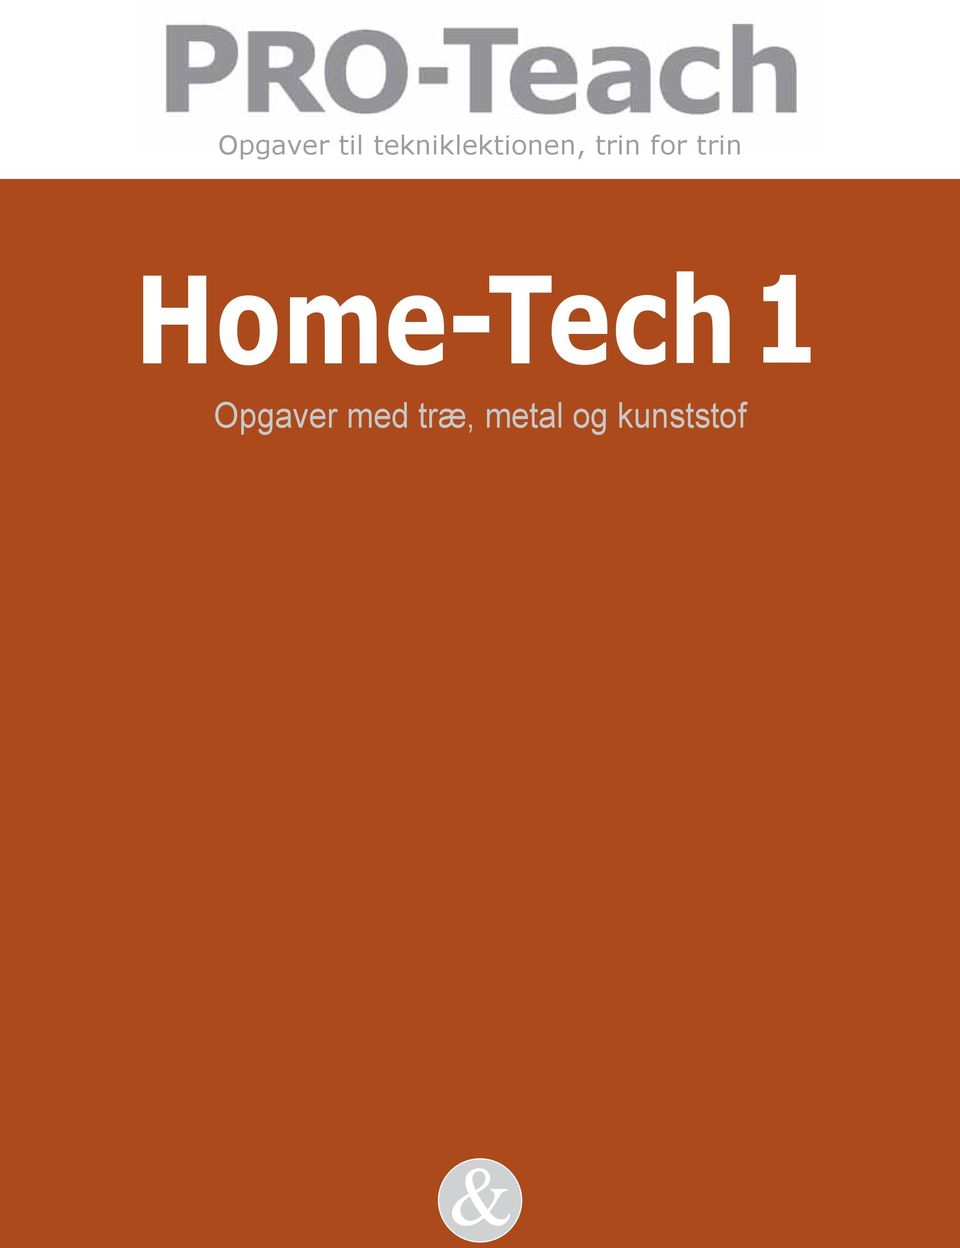 for trin Home-Tech 1